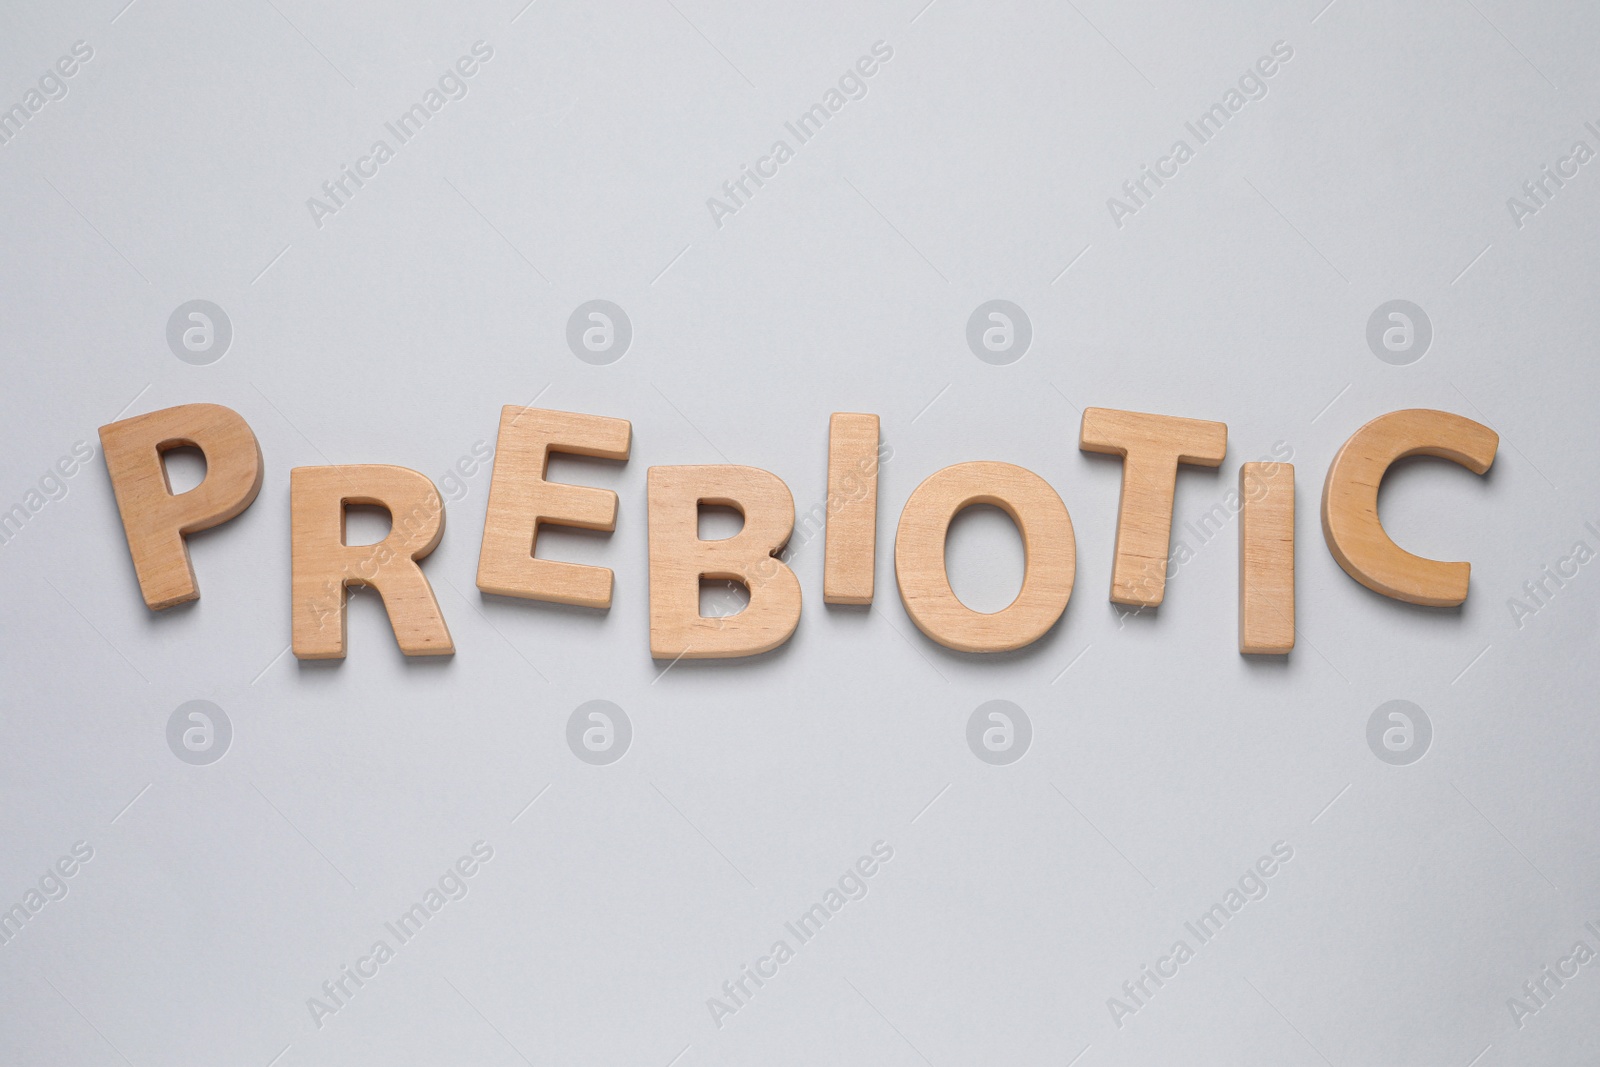 Photo of Word Prebiotic made of wooden letters on white background, top view